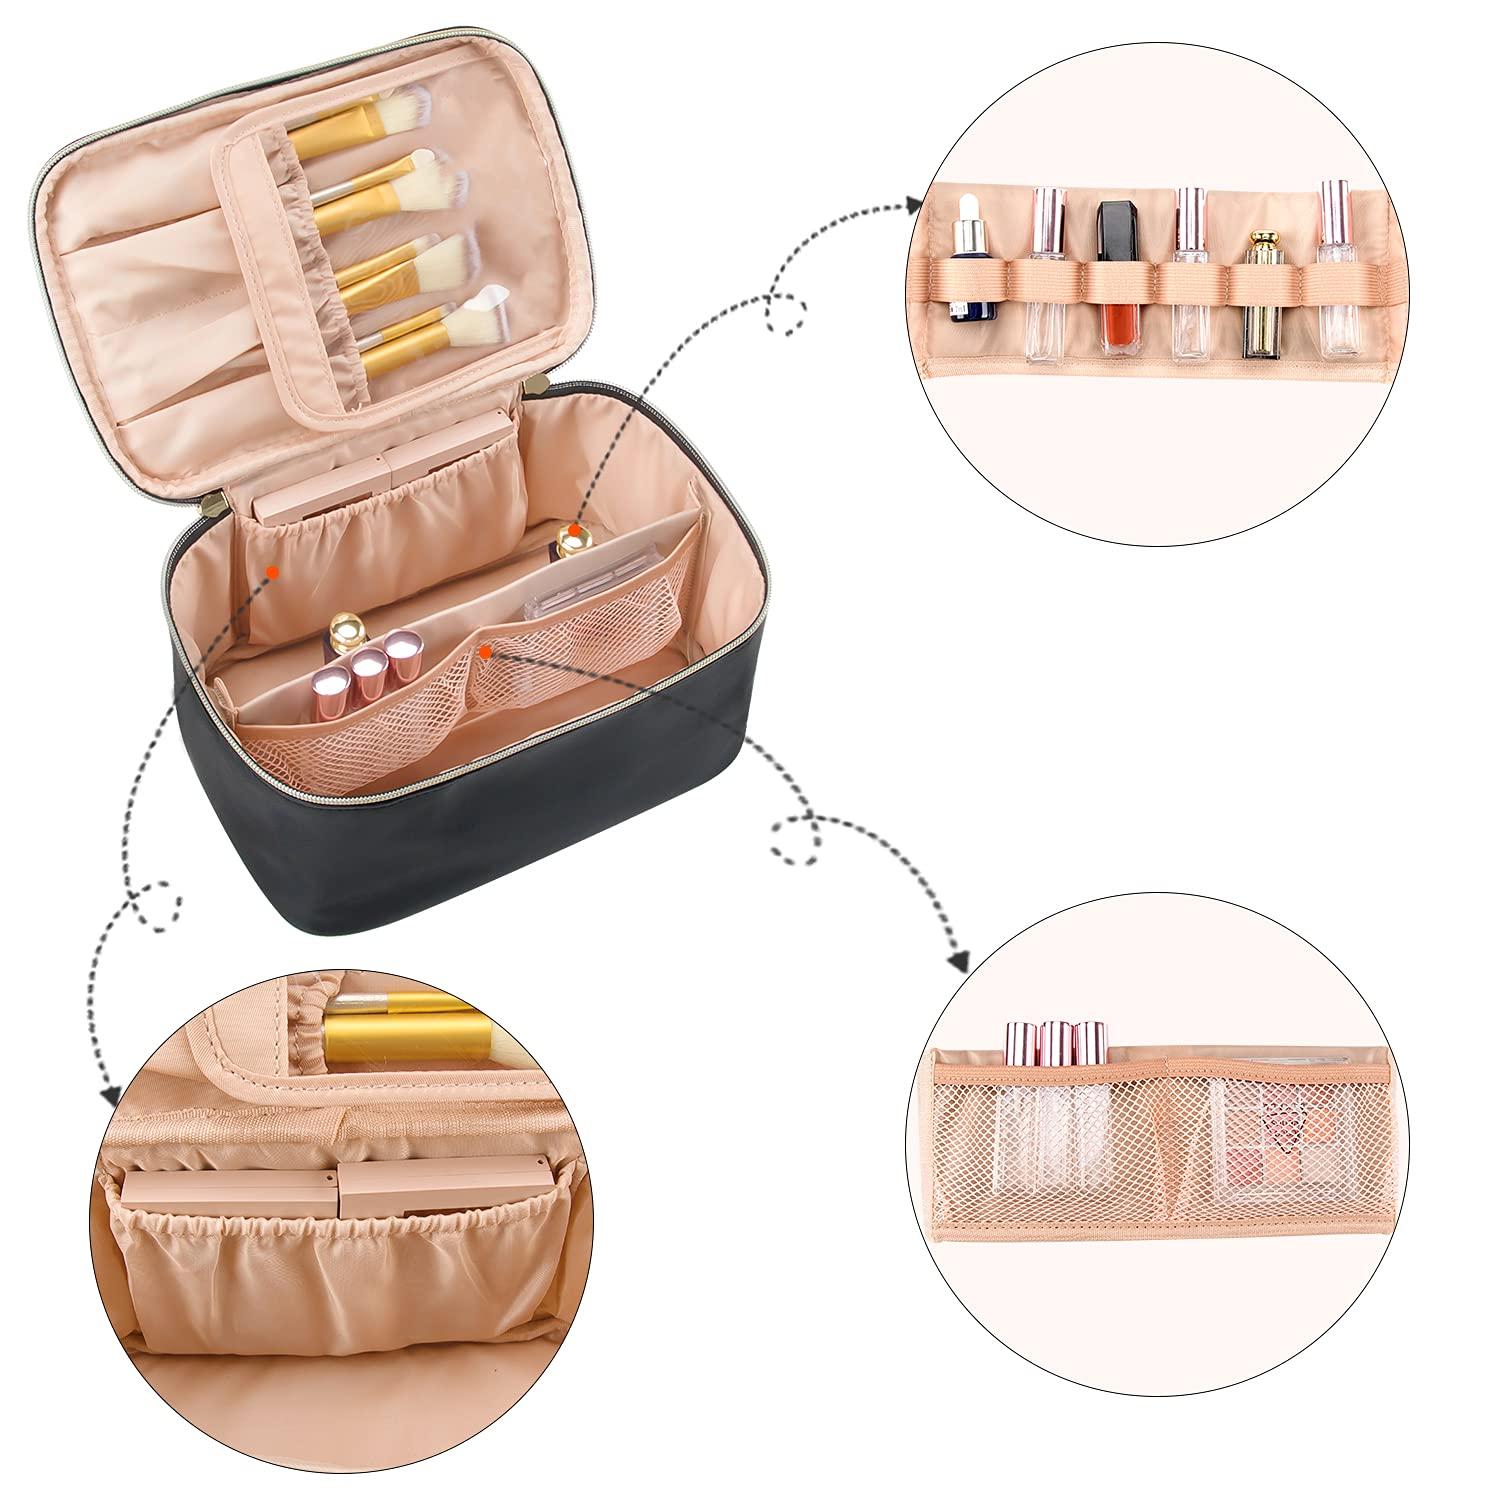 Professional cosmetic case with dividers - Women Nylon Makeup Case Org